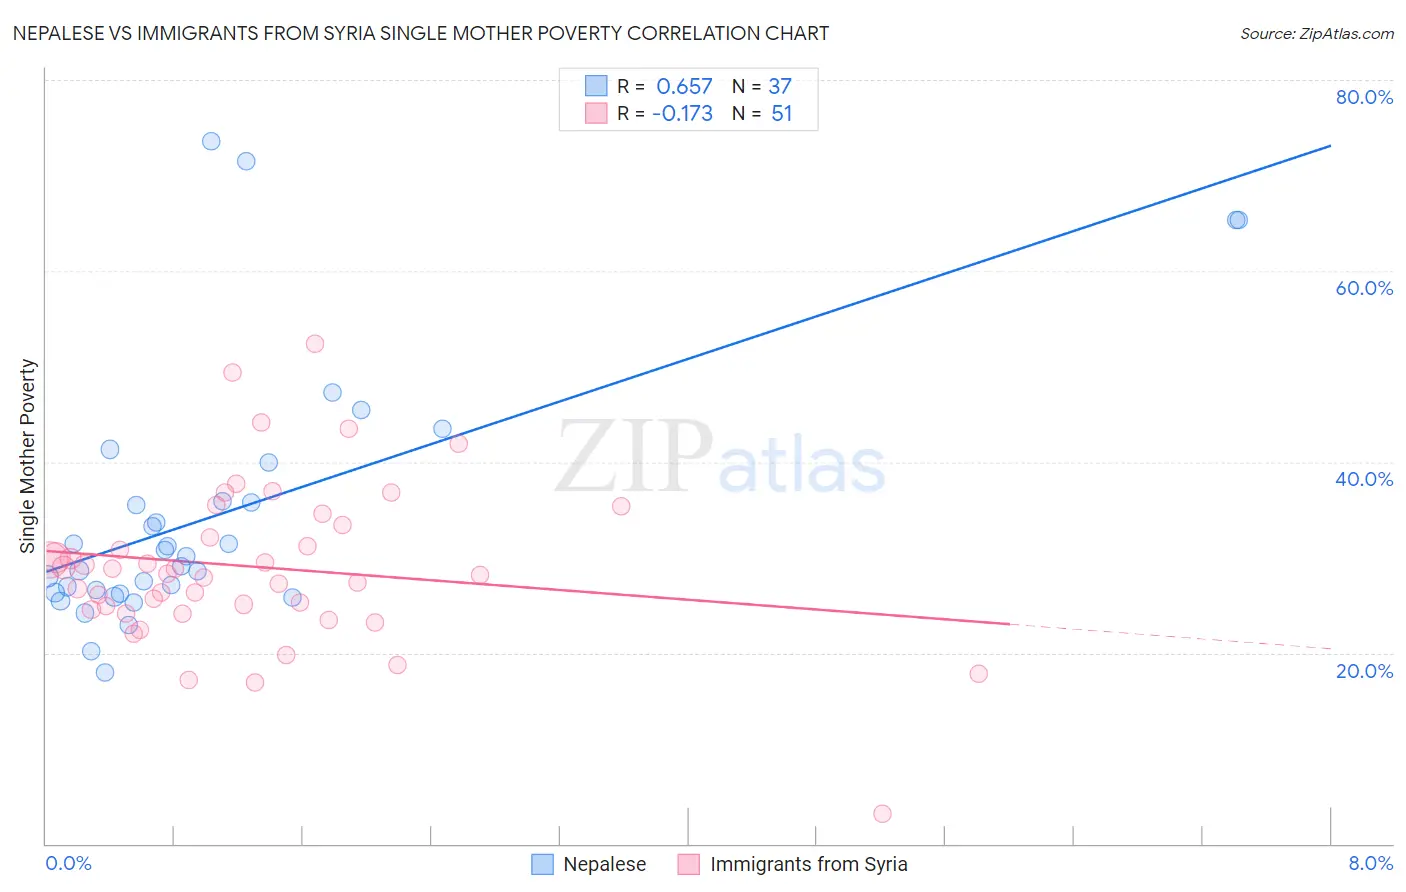 Nepalese vs Immigrants from Syria Single Mother Poverty